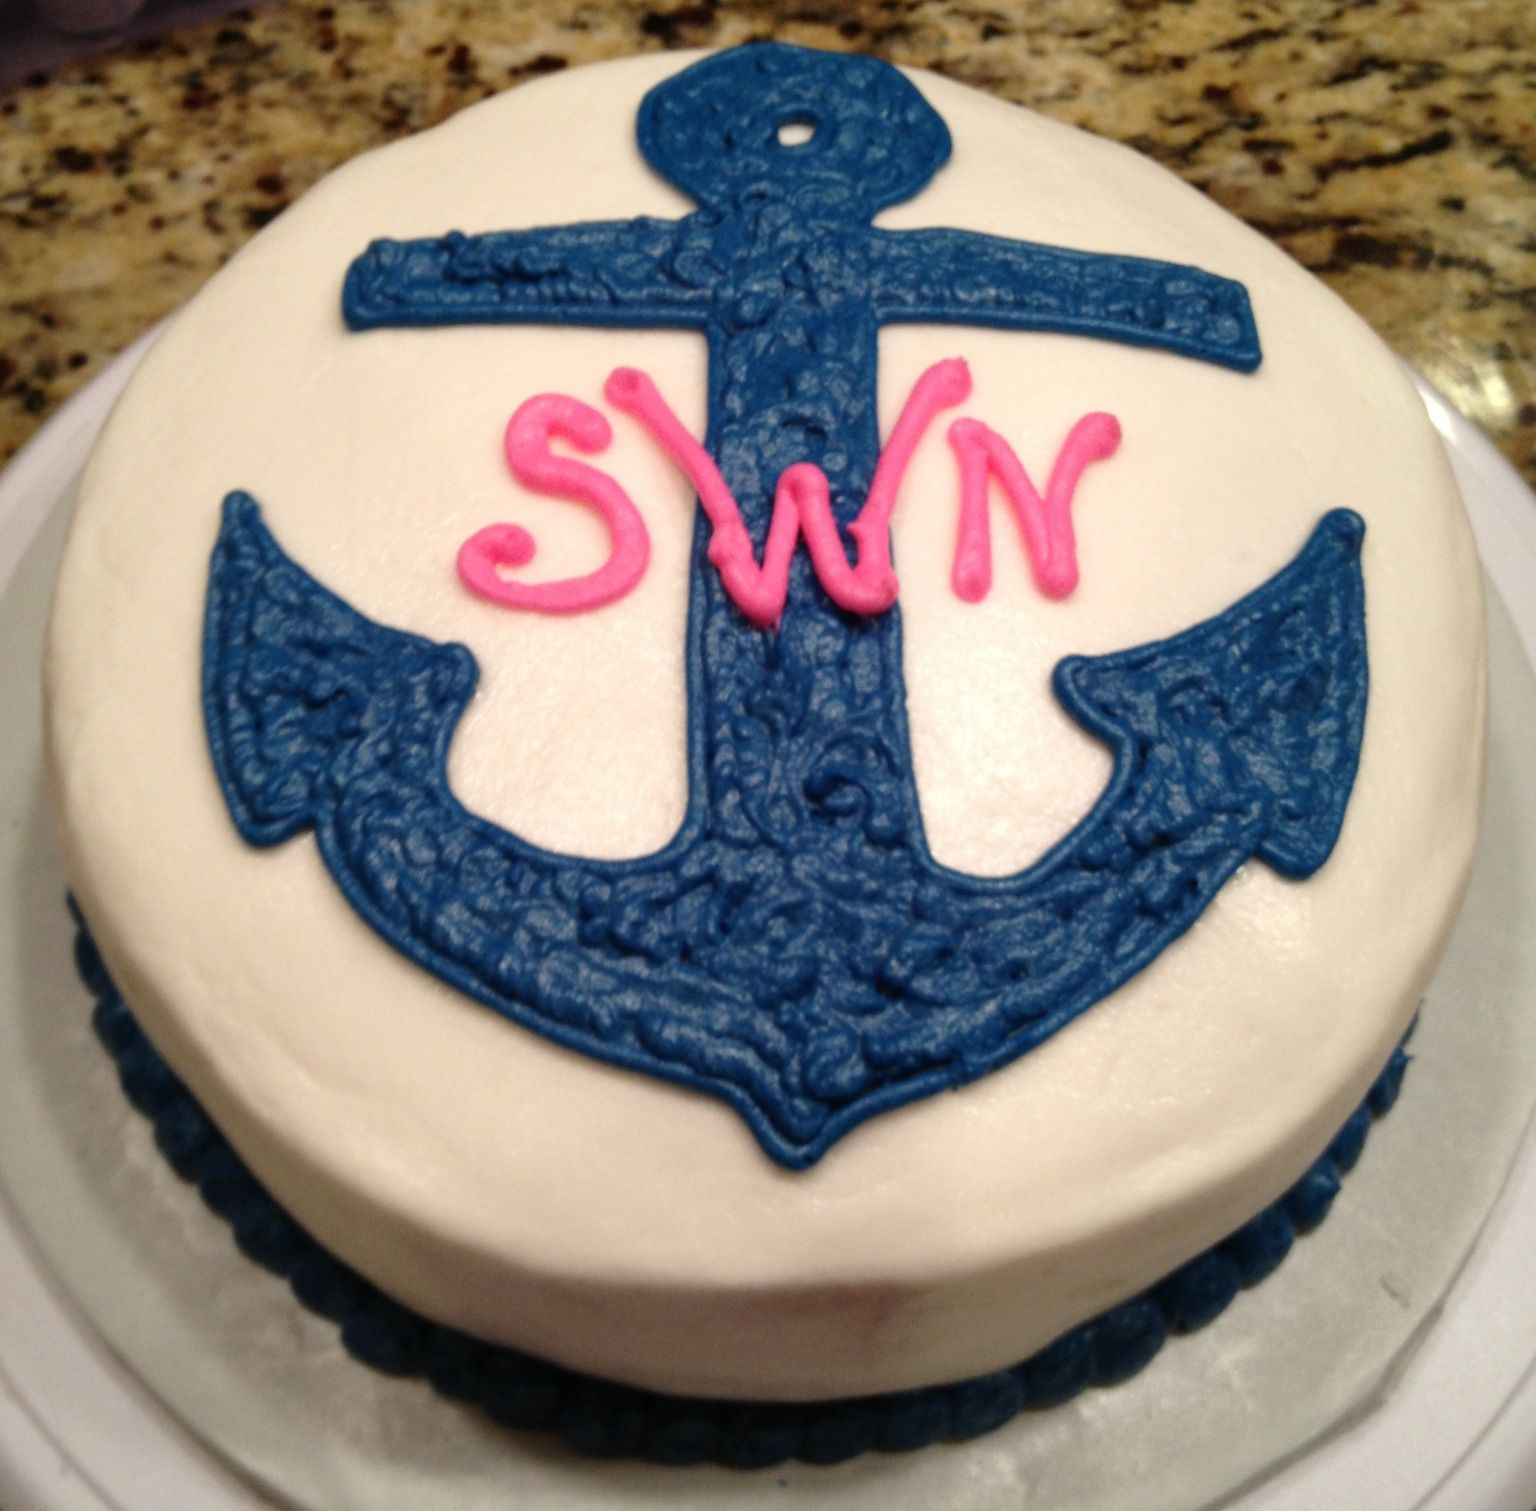 Anchor Birthday Cakes
 An anchor cake a home baker could decorate